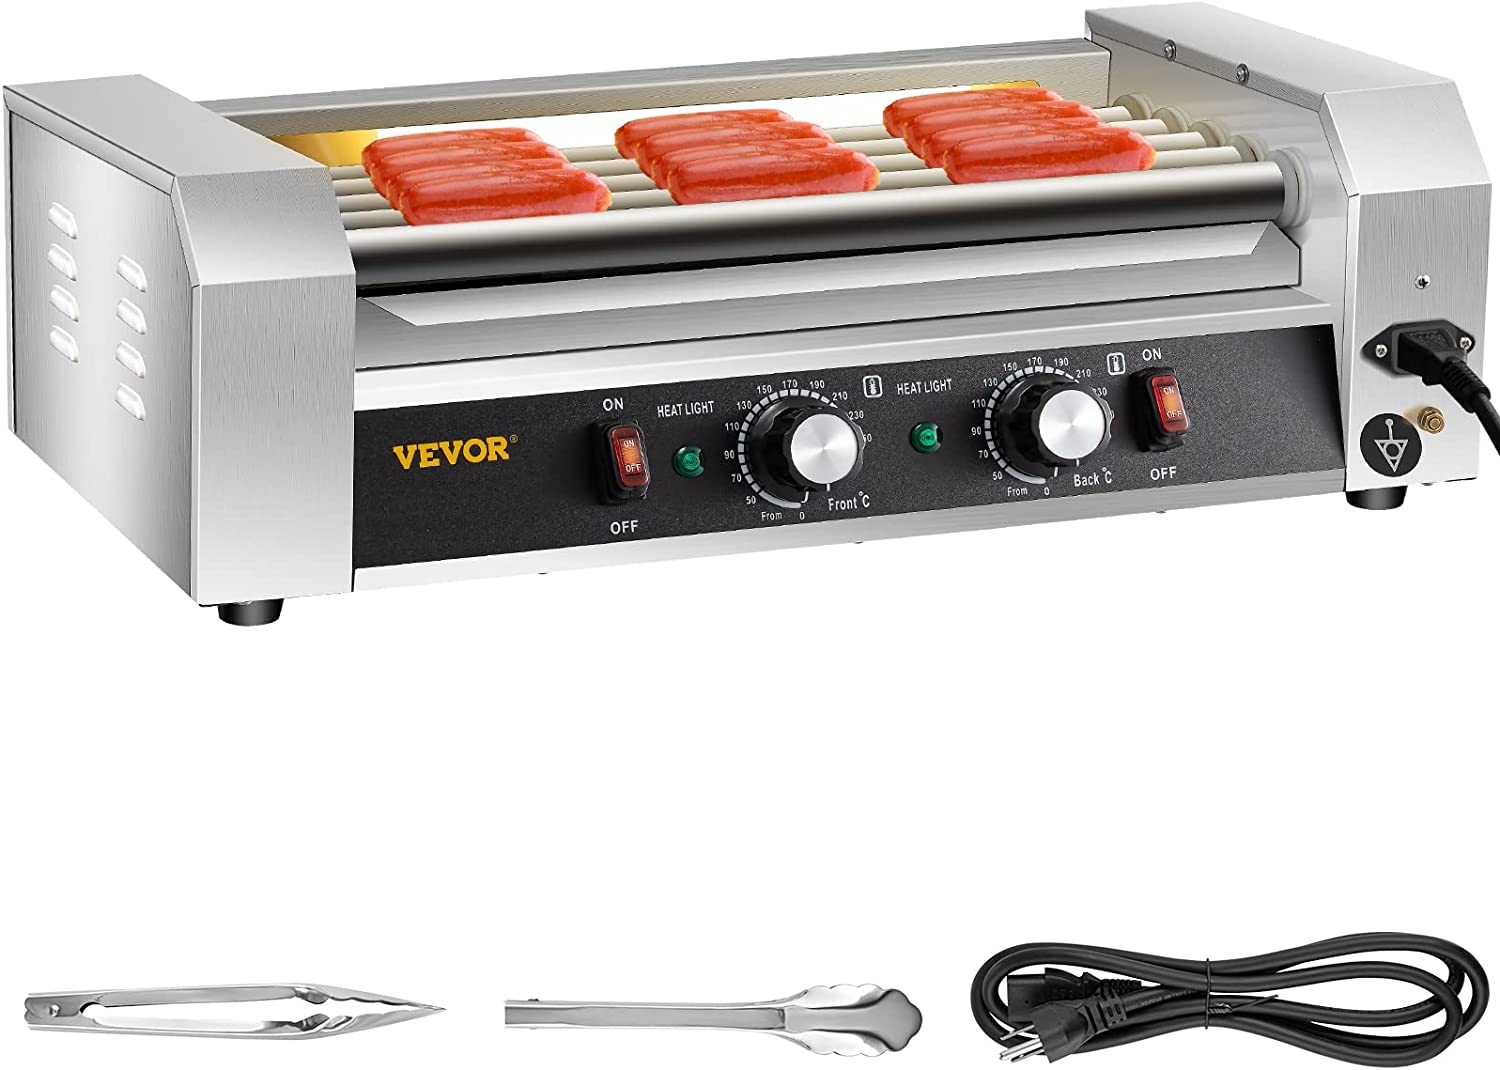 VEVOR Hot Dog Roller, 12 Hot Dog Capacity 5 Rollers, 750W Stainless Steel Cook Warmer Machine with Dual Temp Control, LED Light